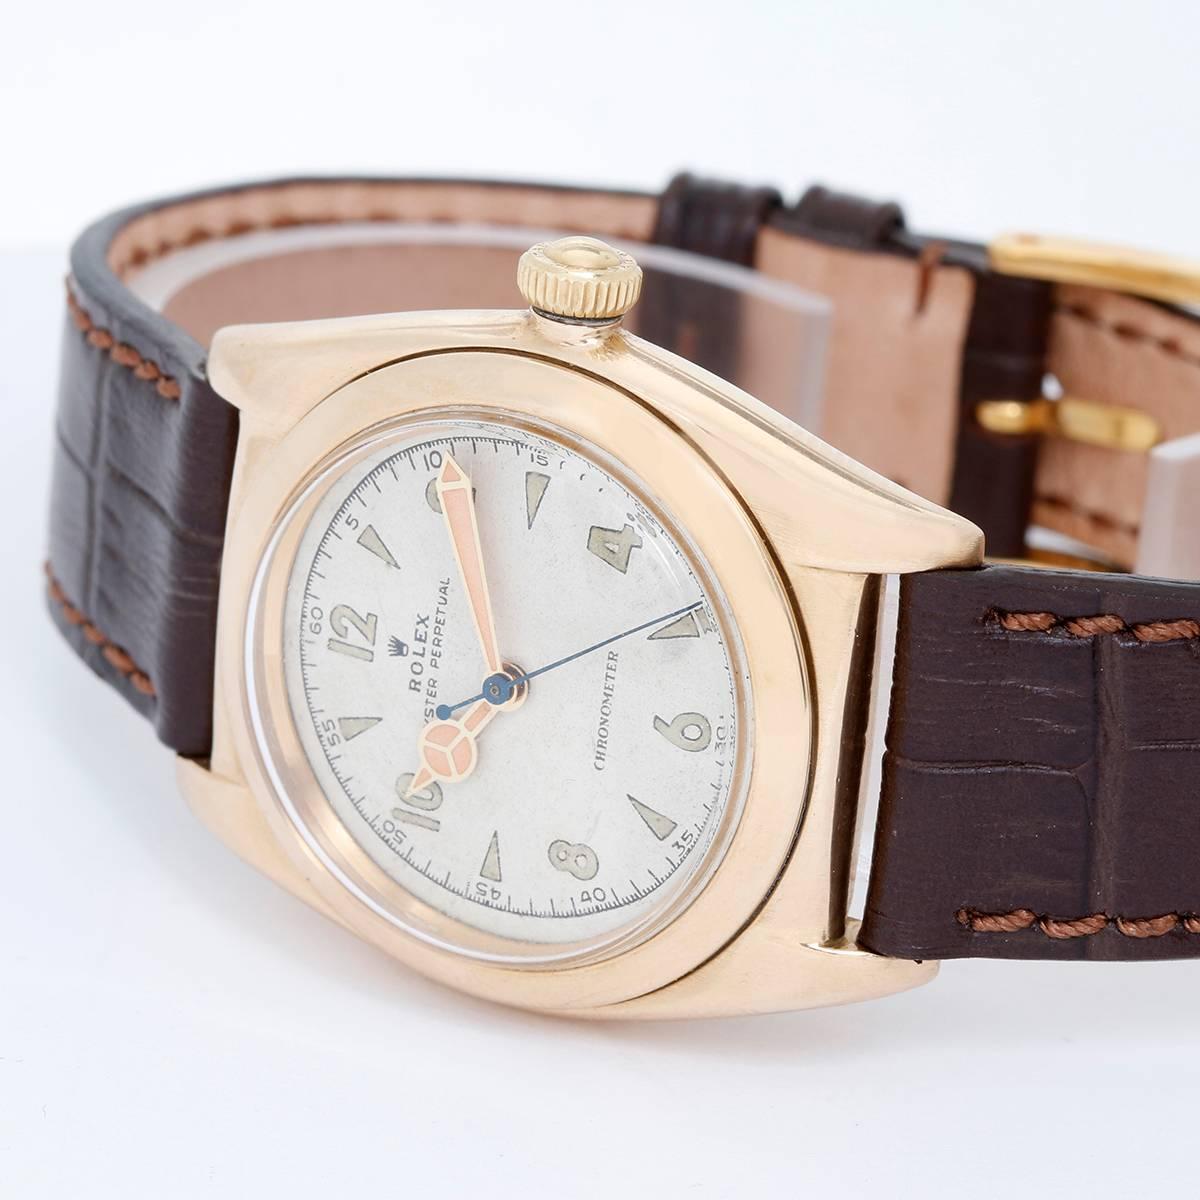 Vintage Rolex Yellow Gold Oyster Perpetual Bubbleback White Roman Arabic Dial  3131 -  Automatic winding. 14k yellow gold case with smooth bezel (31mm diameter). White Arabic numeral dial. Brown Croc strap band. Pre-owned with custom box; Vintage